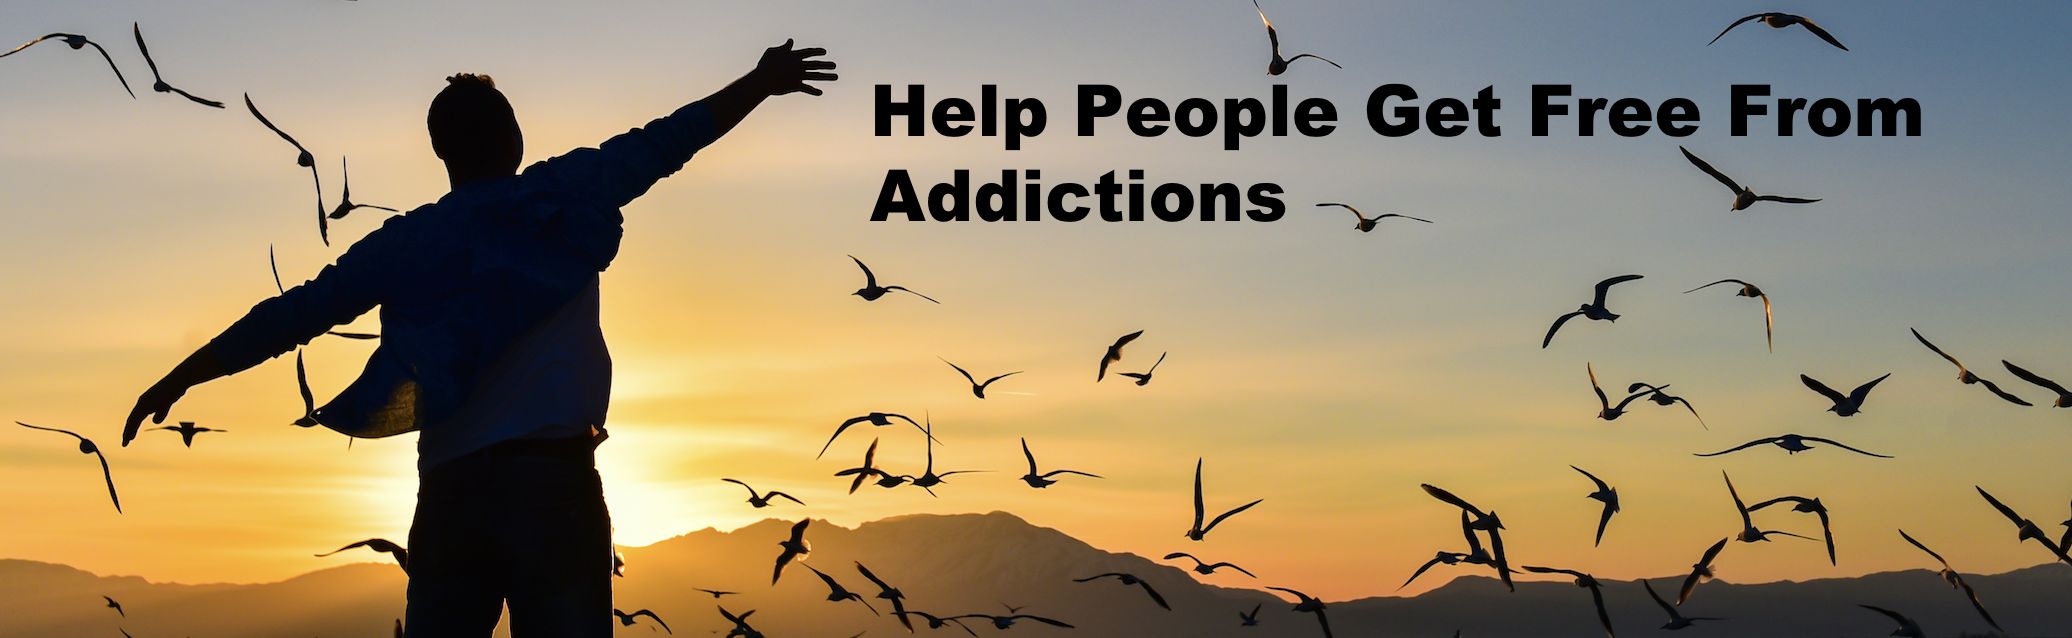 Help People Get Free of Addictions